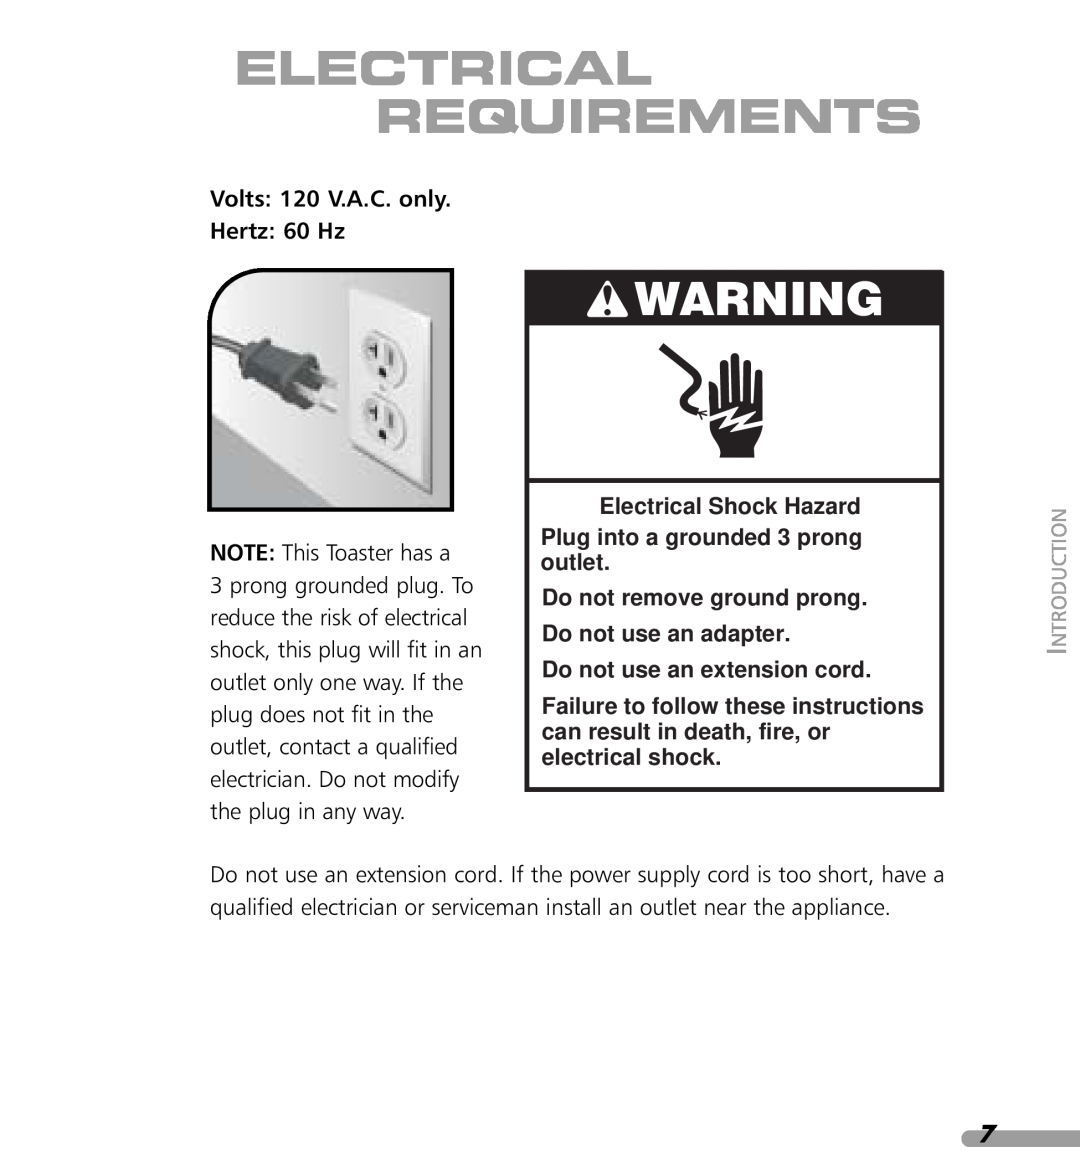 KitchenAid KPTT780, KPTT890 manual Electrical Requirements, Volts 120 V.A.C. only Hertz 60 Hz, Do not use an extension cord 